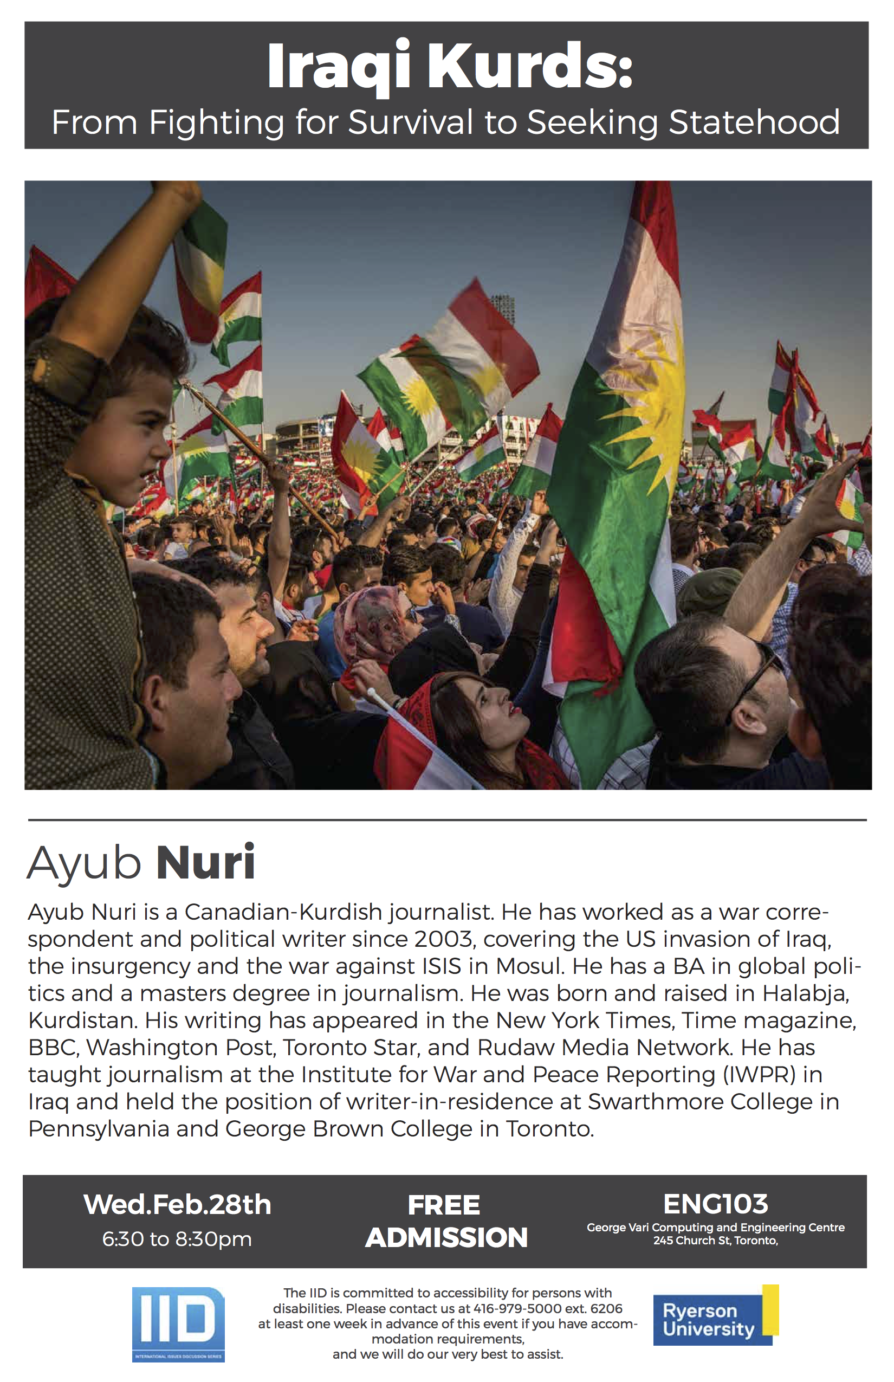 Iraqi Kurds: From Fighting for Survival to Seeking Statehood – Wednesday, February 28, 2018